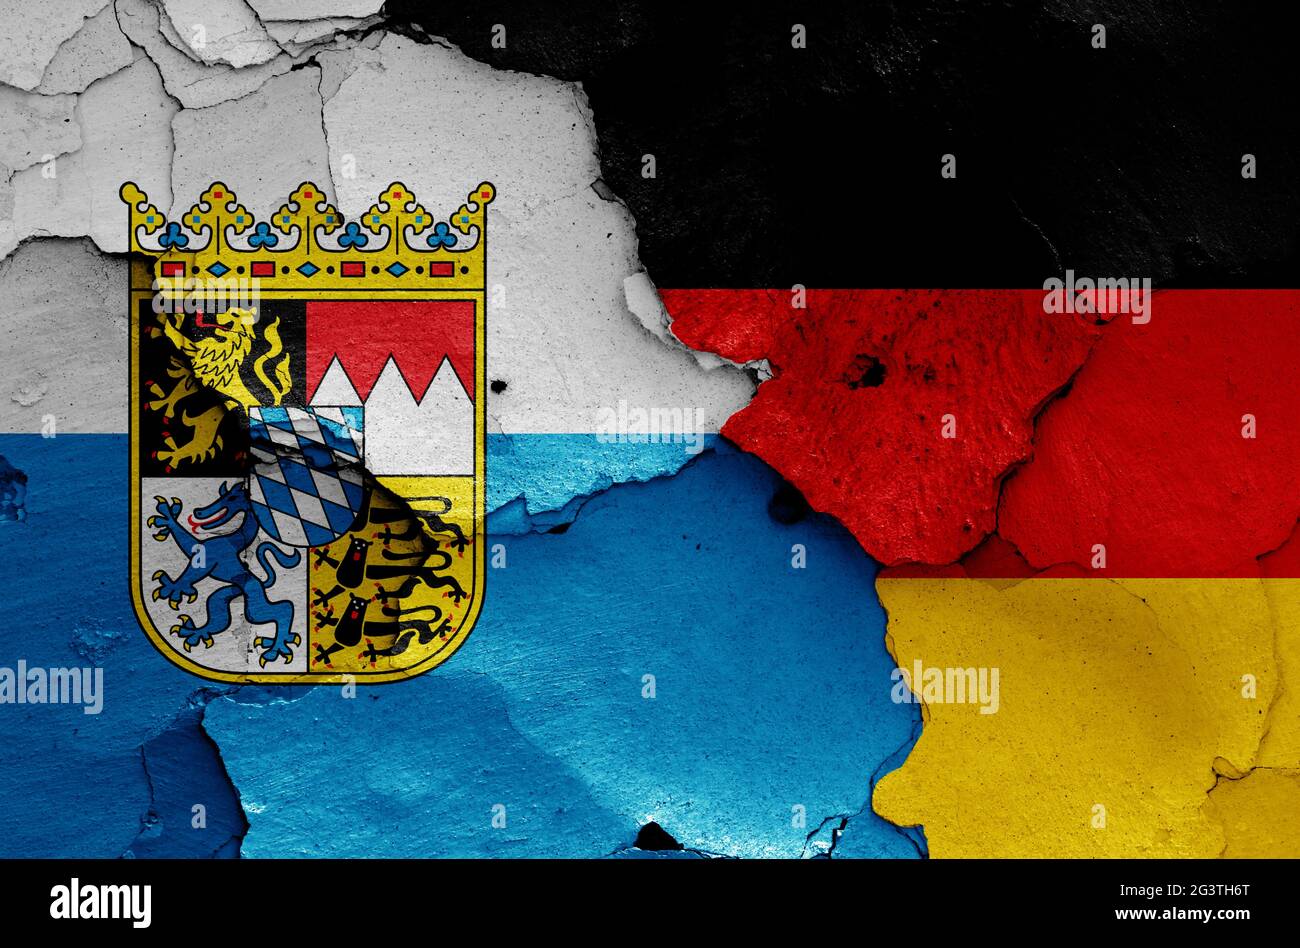 Flags of Bavaria state and Germany painted on cracked wall Stock Photo